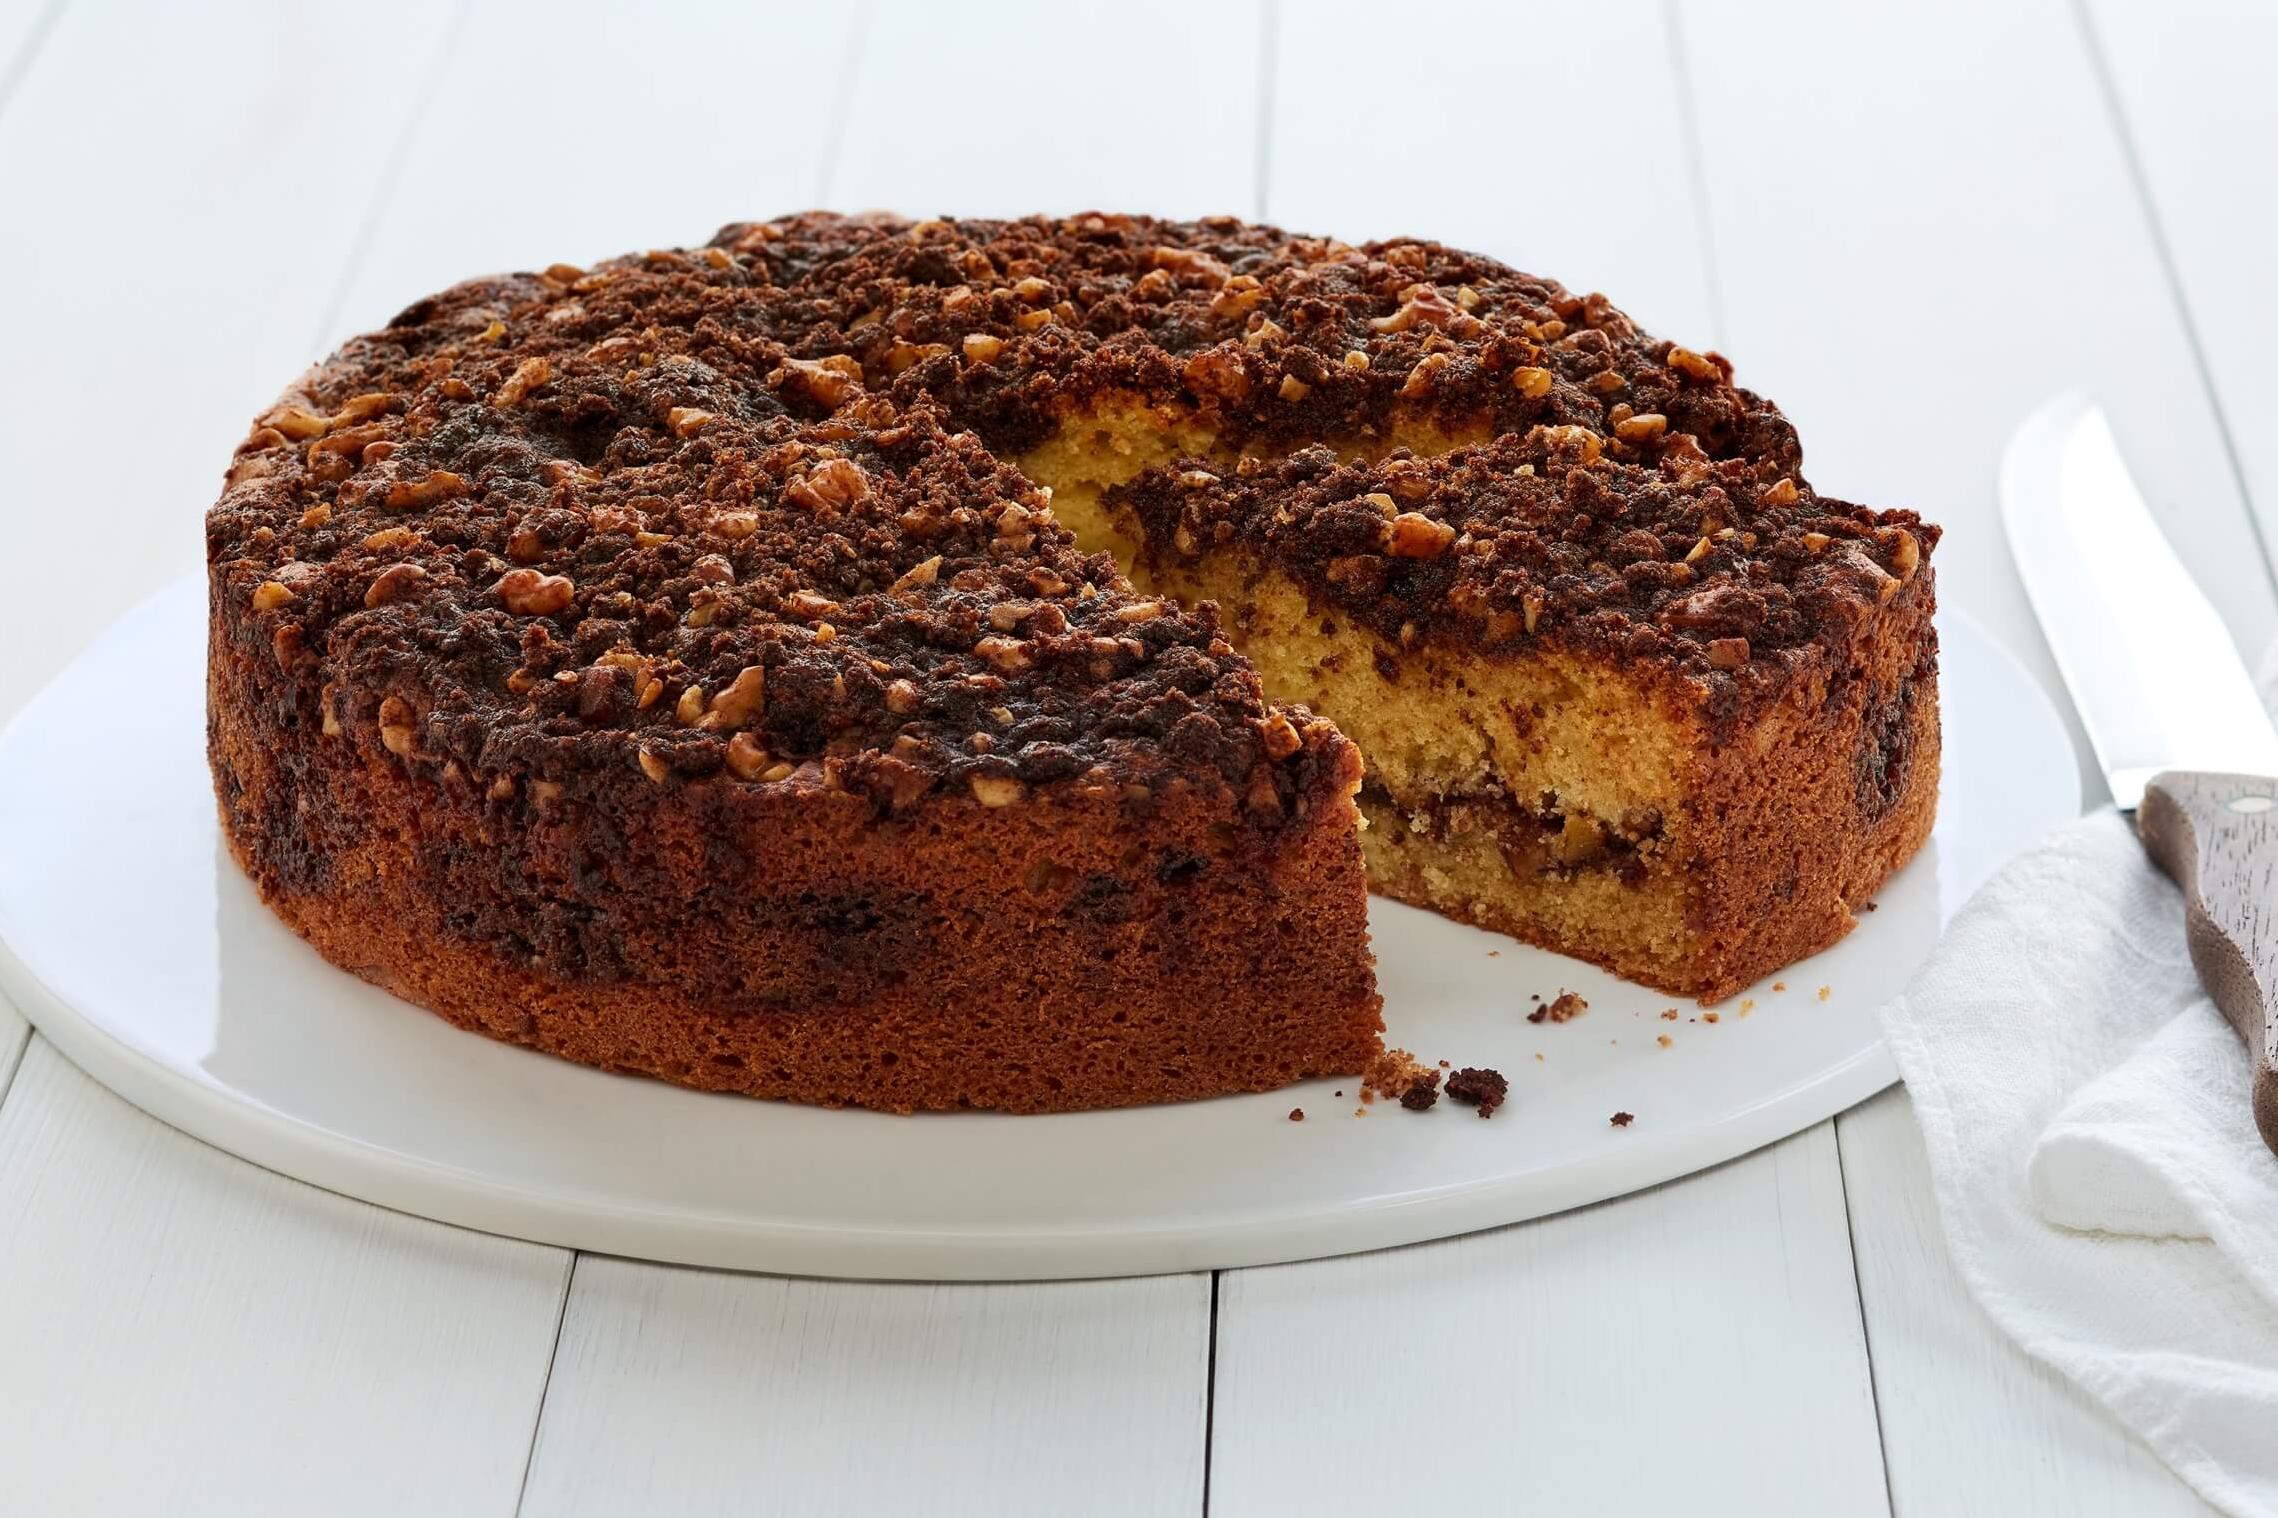  Decadent layers of cinnamon, chocolate, and apricot meet in this heavenly coffee cake